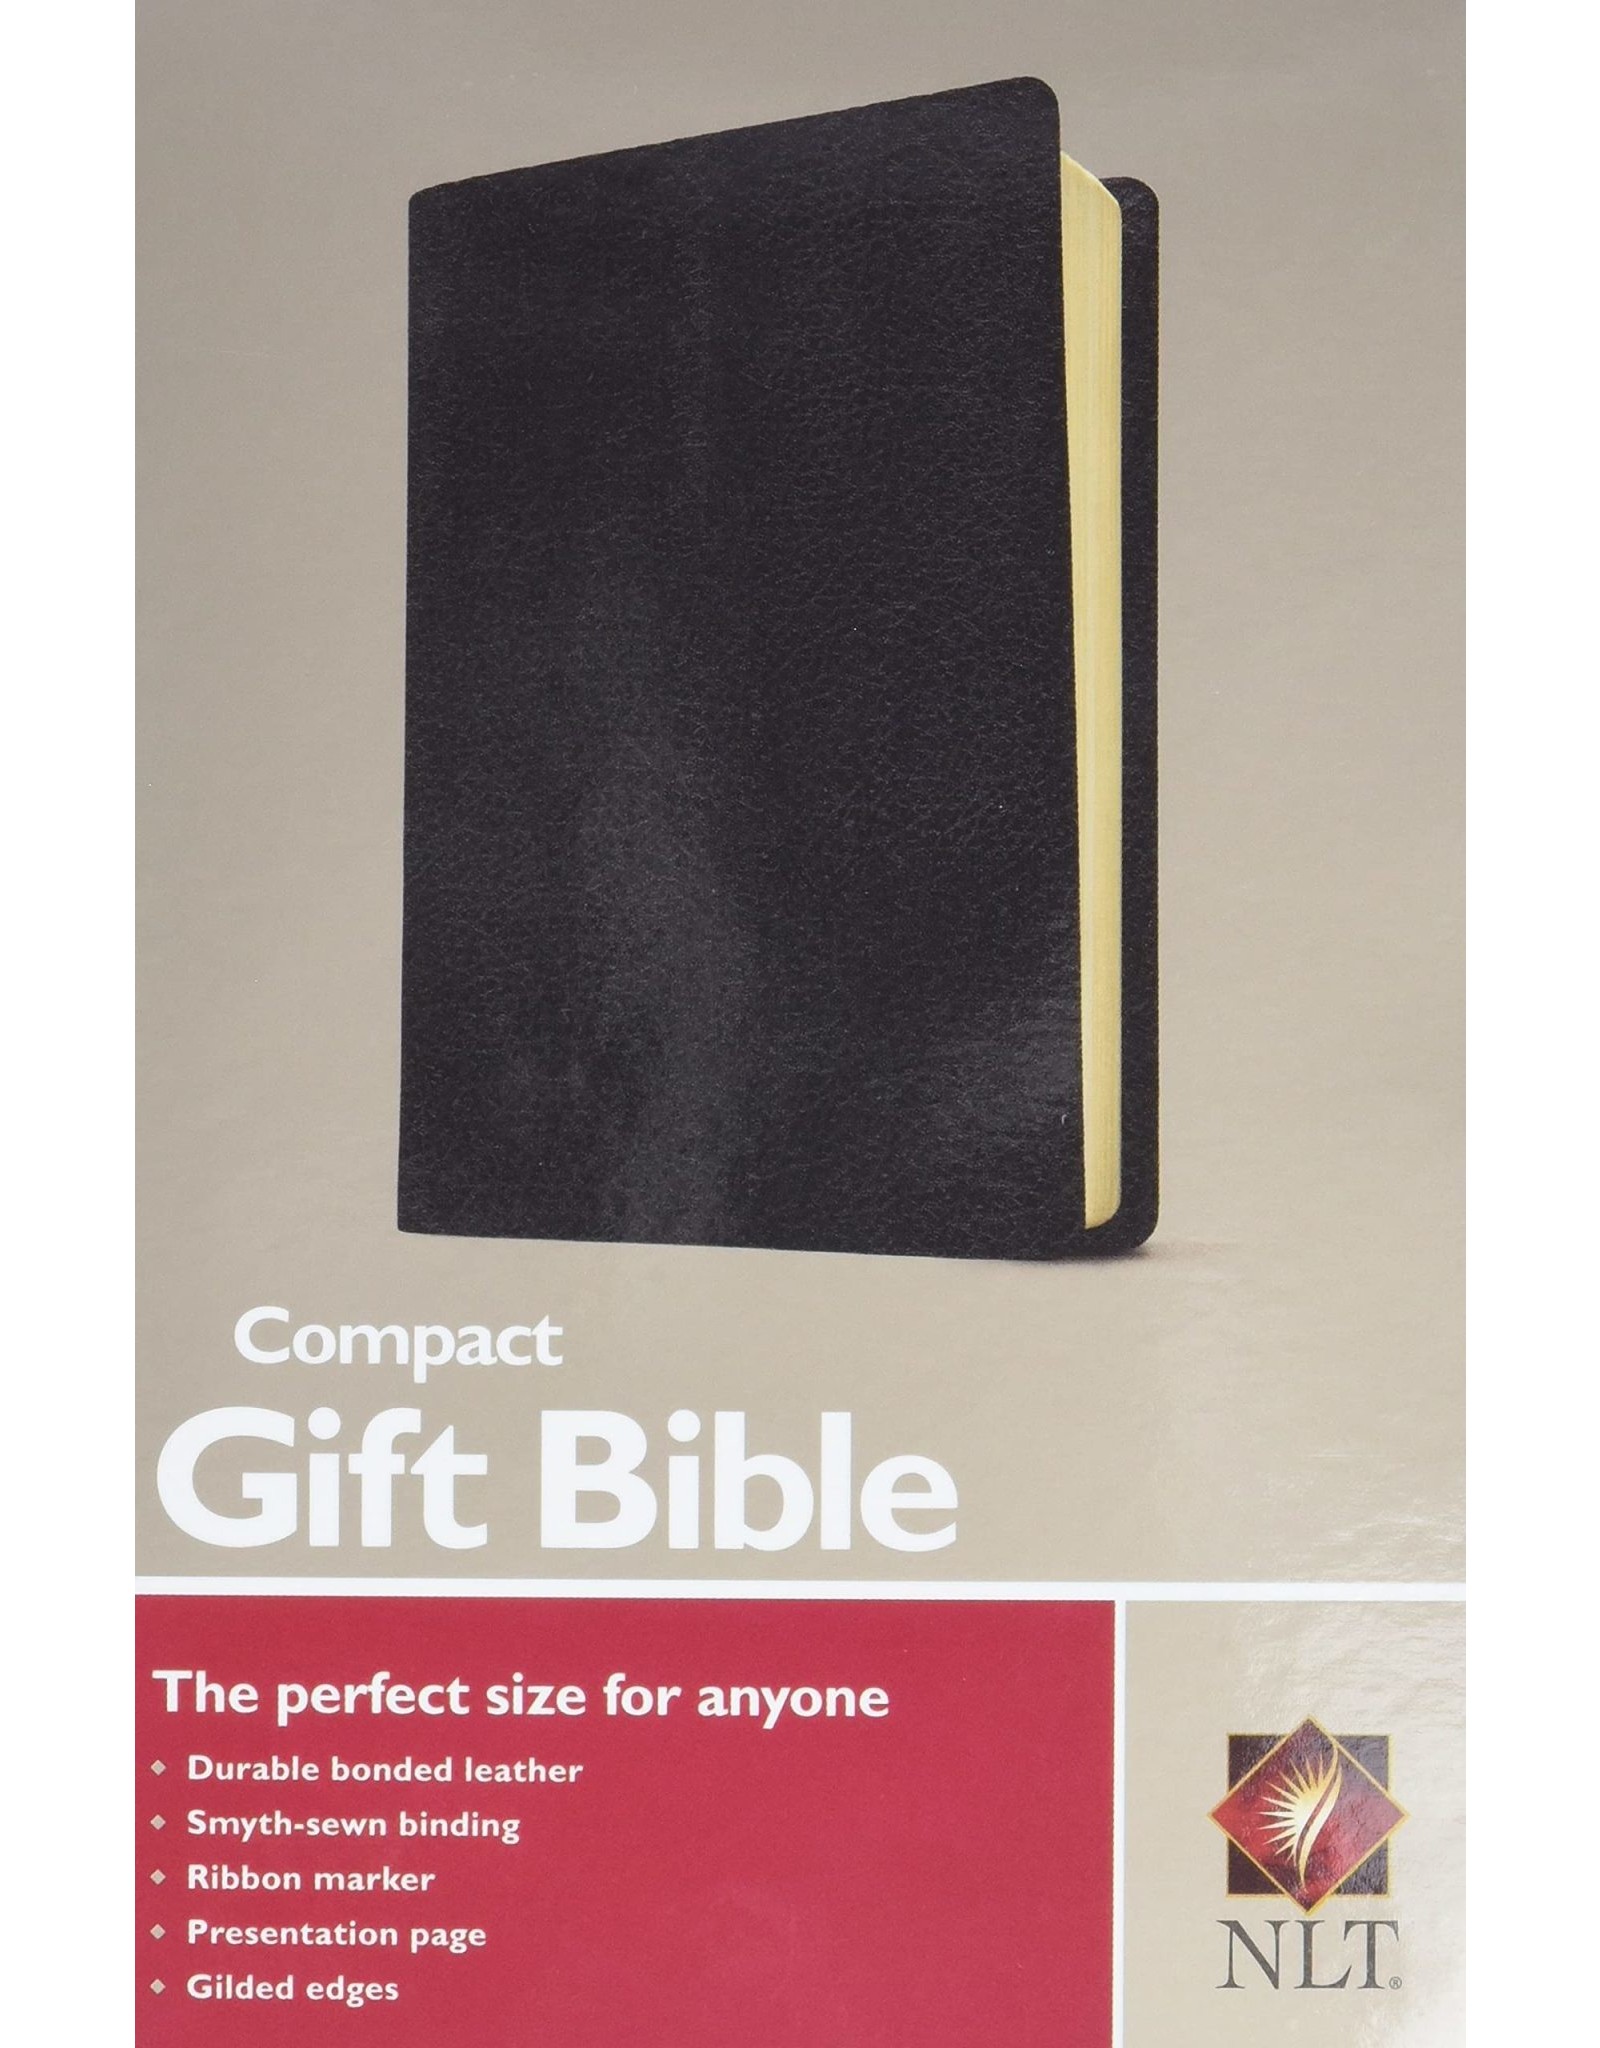 Tyndale House Publishers NLT Compact Black Leather Bible